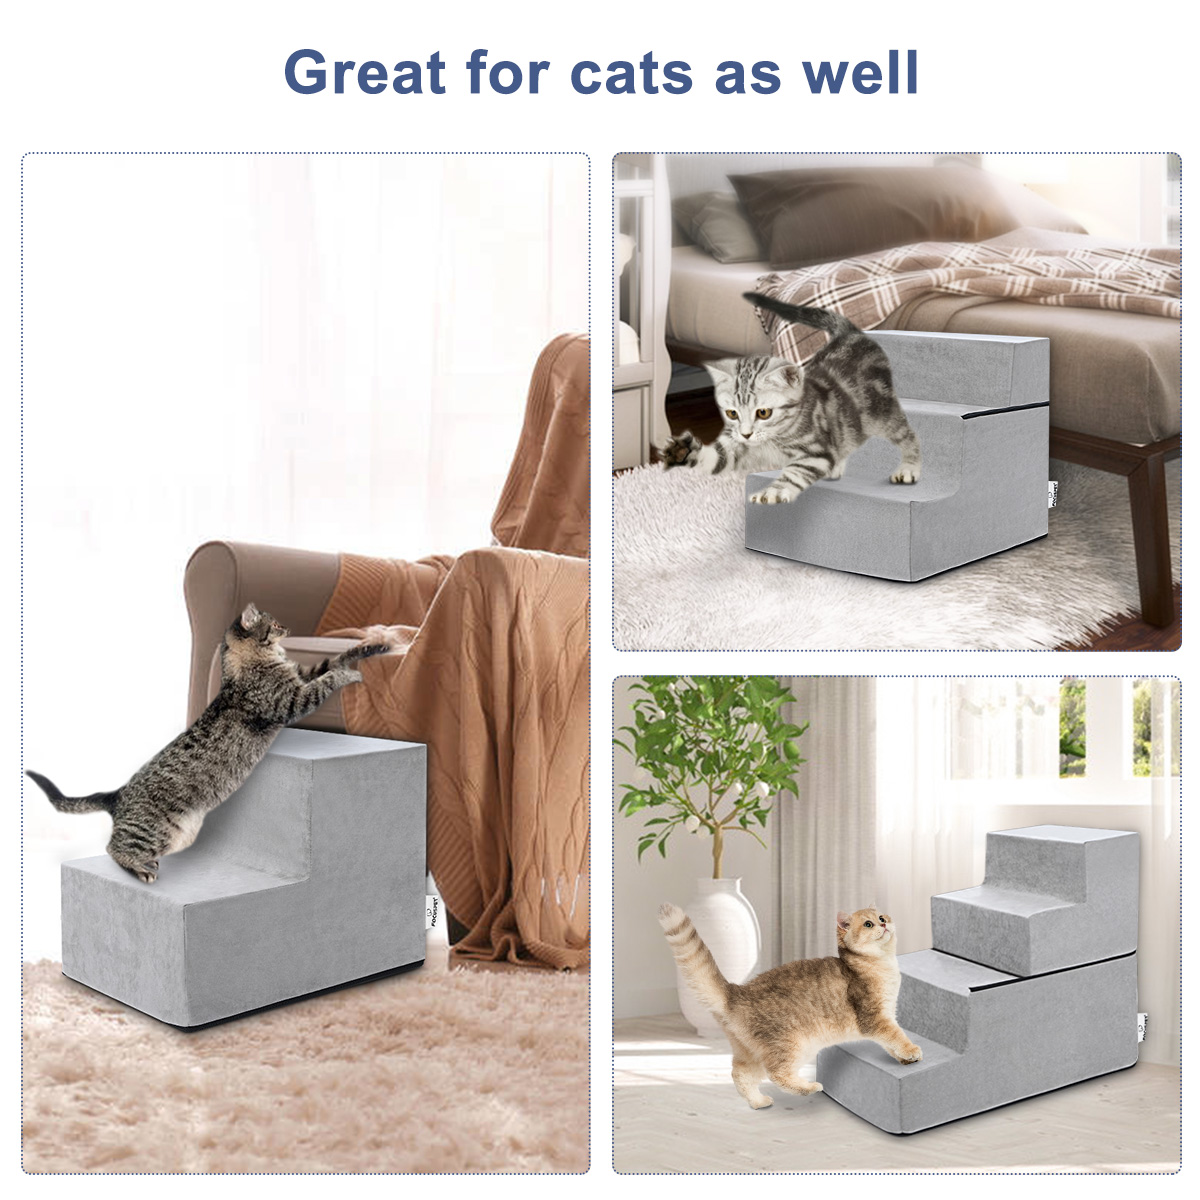 Steps-Pet-Stairs-Climb-Foam-Ladder-Cover-Indoor-Cat-Dog-Ramp-Climbing-Cover-Puppy-Supplies-1952400-9